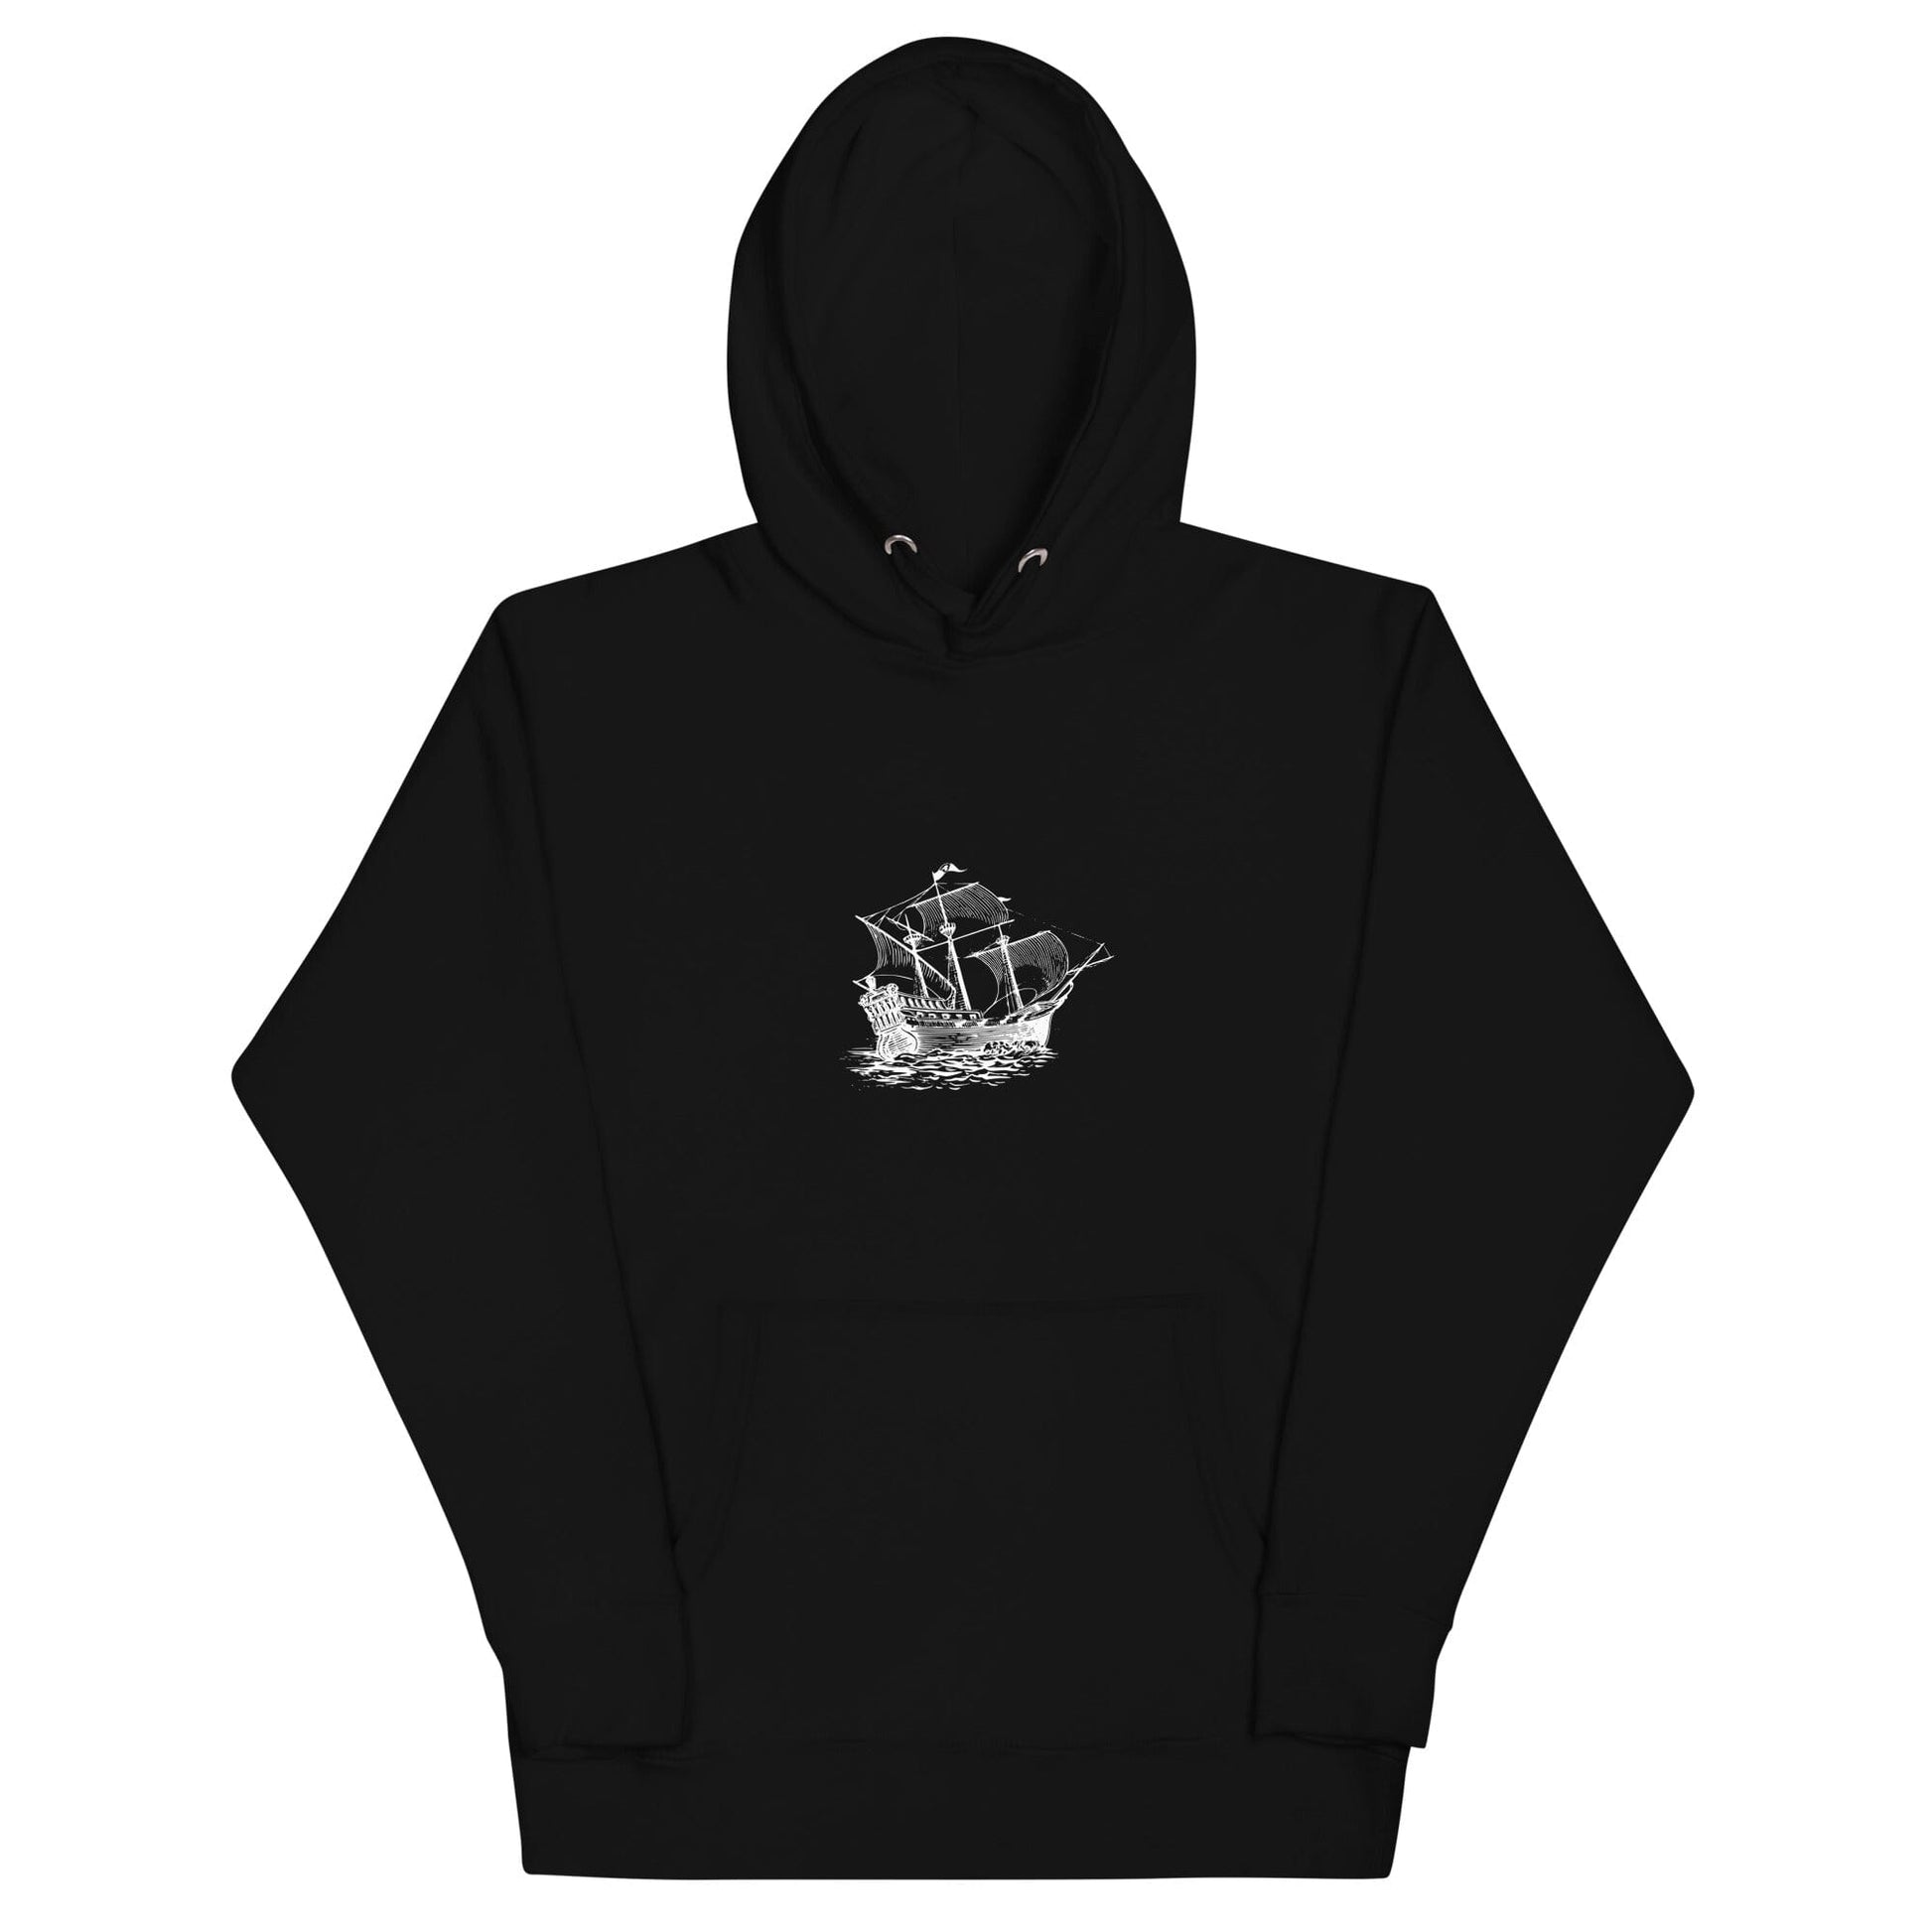 We're All On The Same Boat unisex hoodie